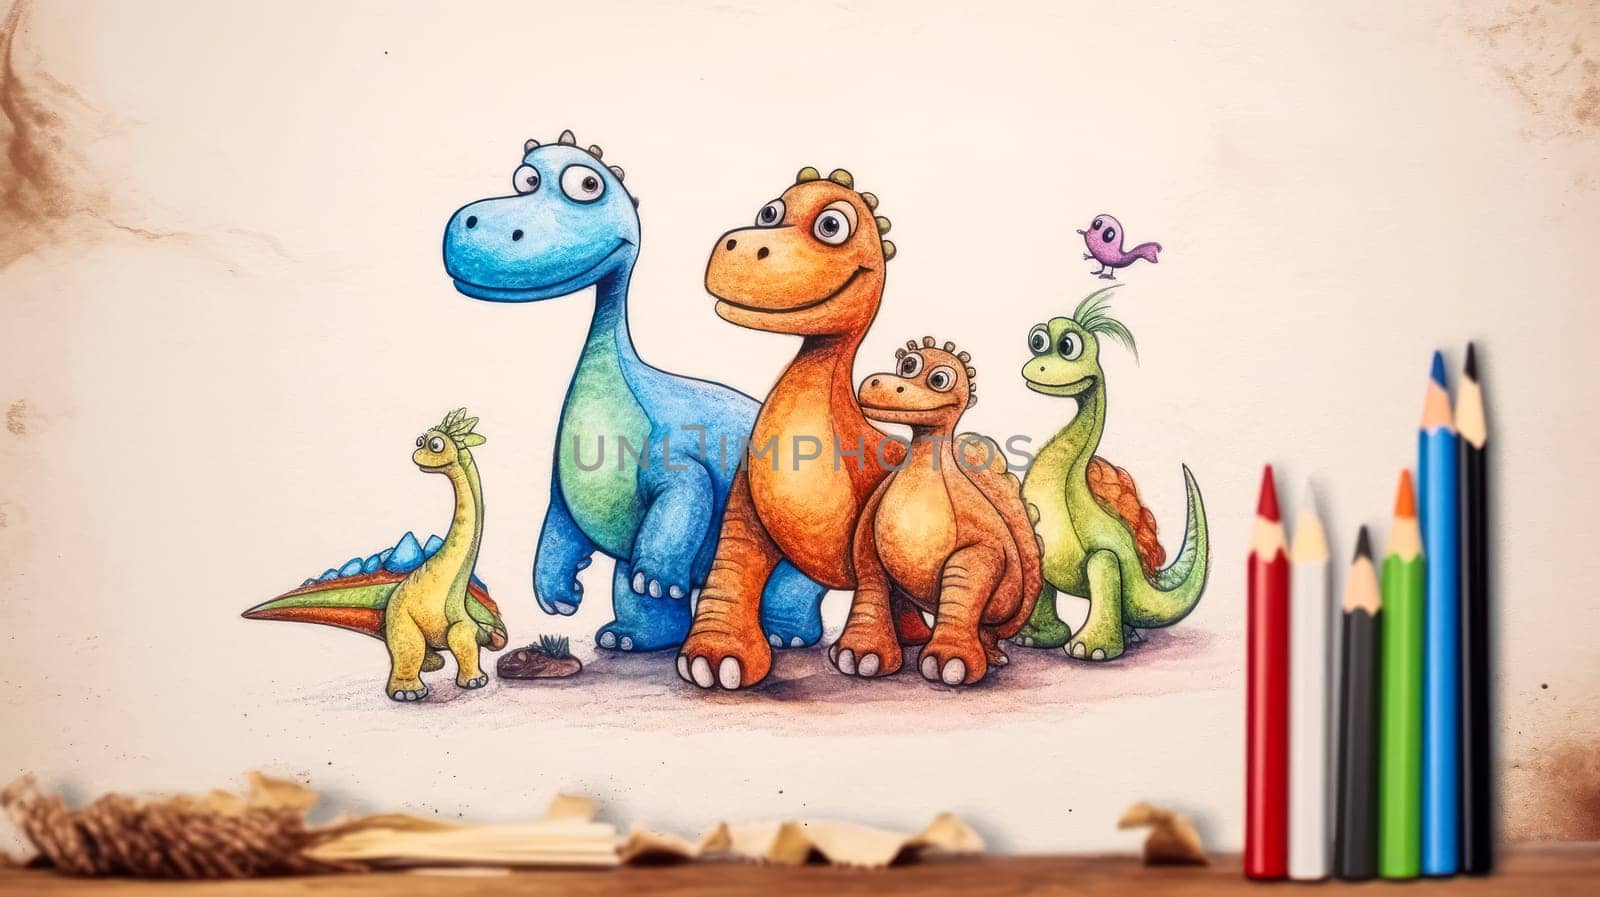 childrens pencil drawing depicts playful dinosaurs and kids having a blast together by Alla_Morozova93